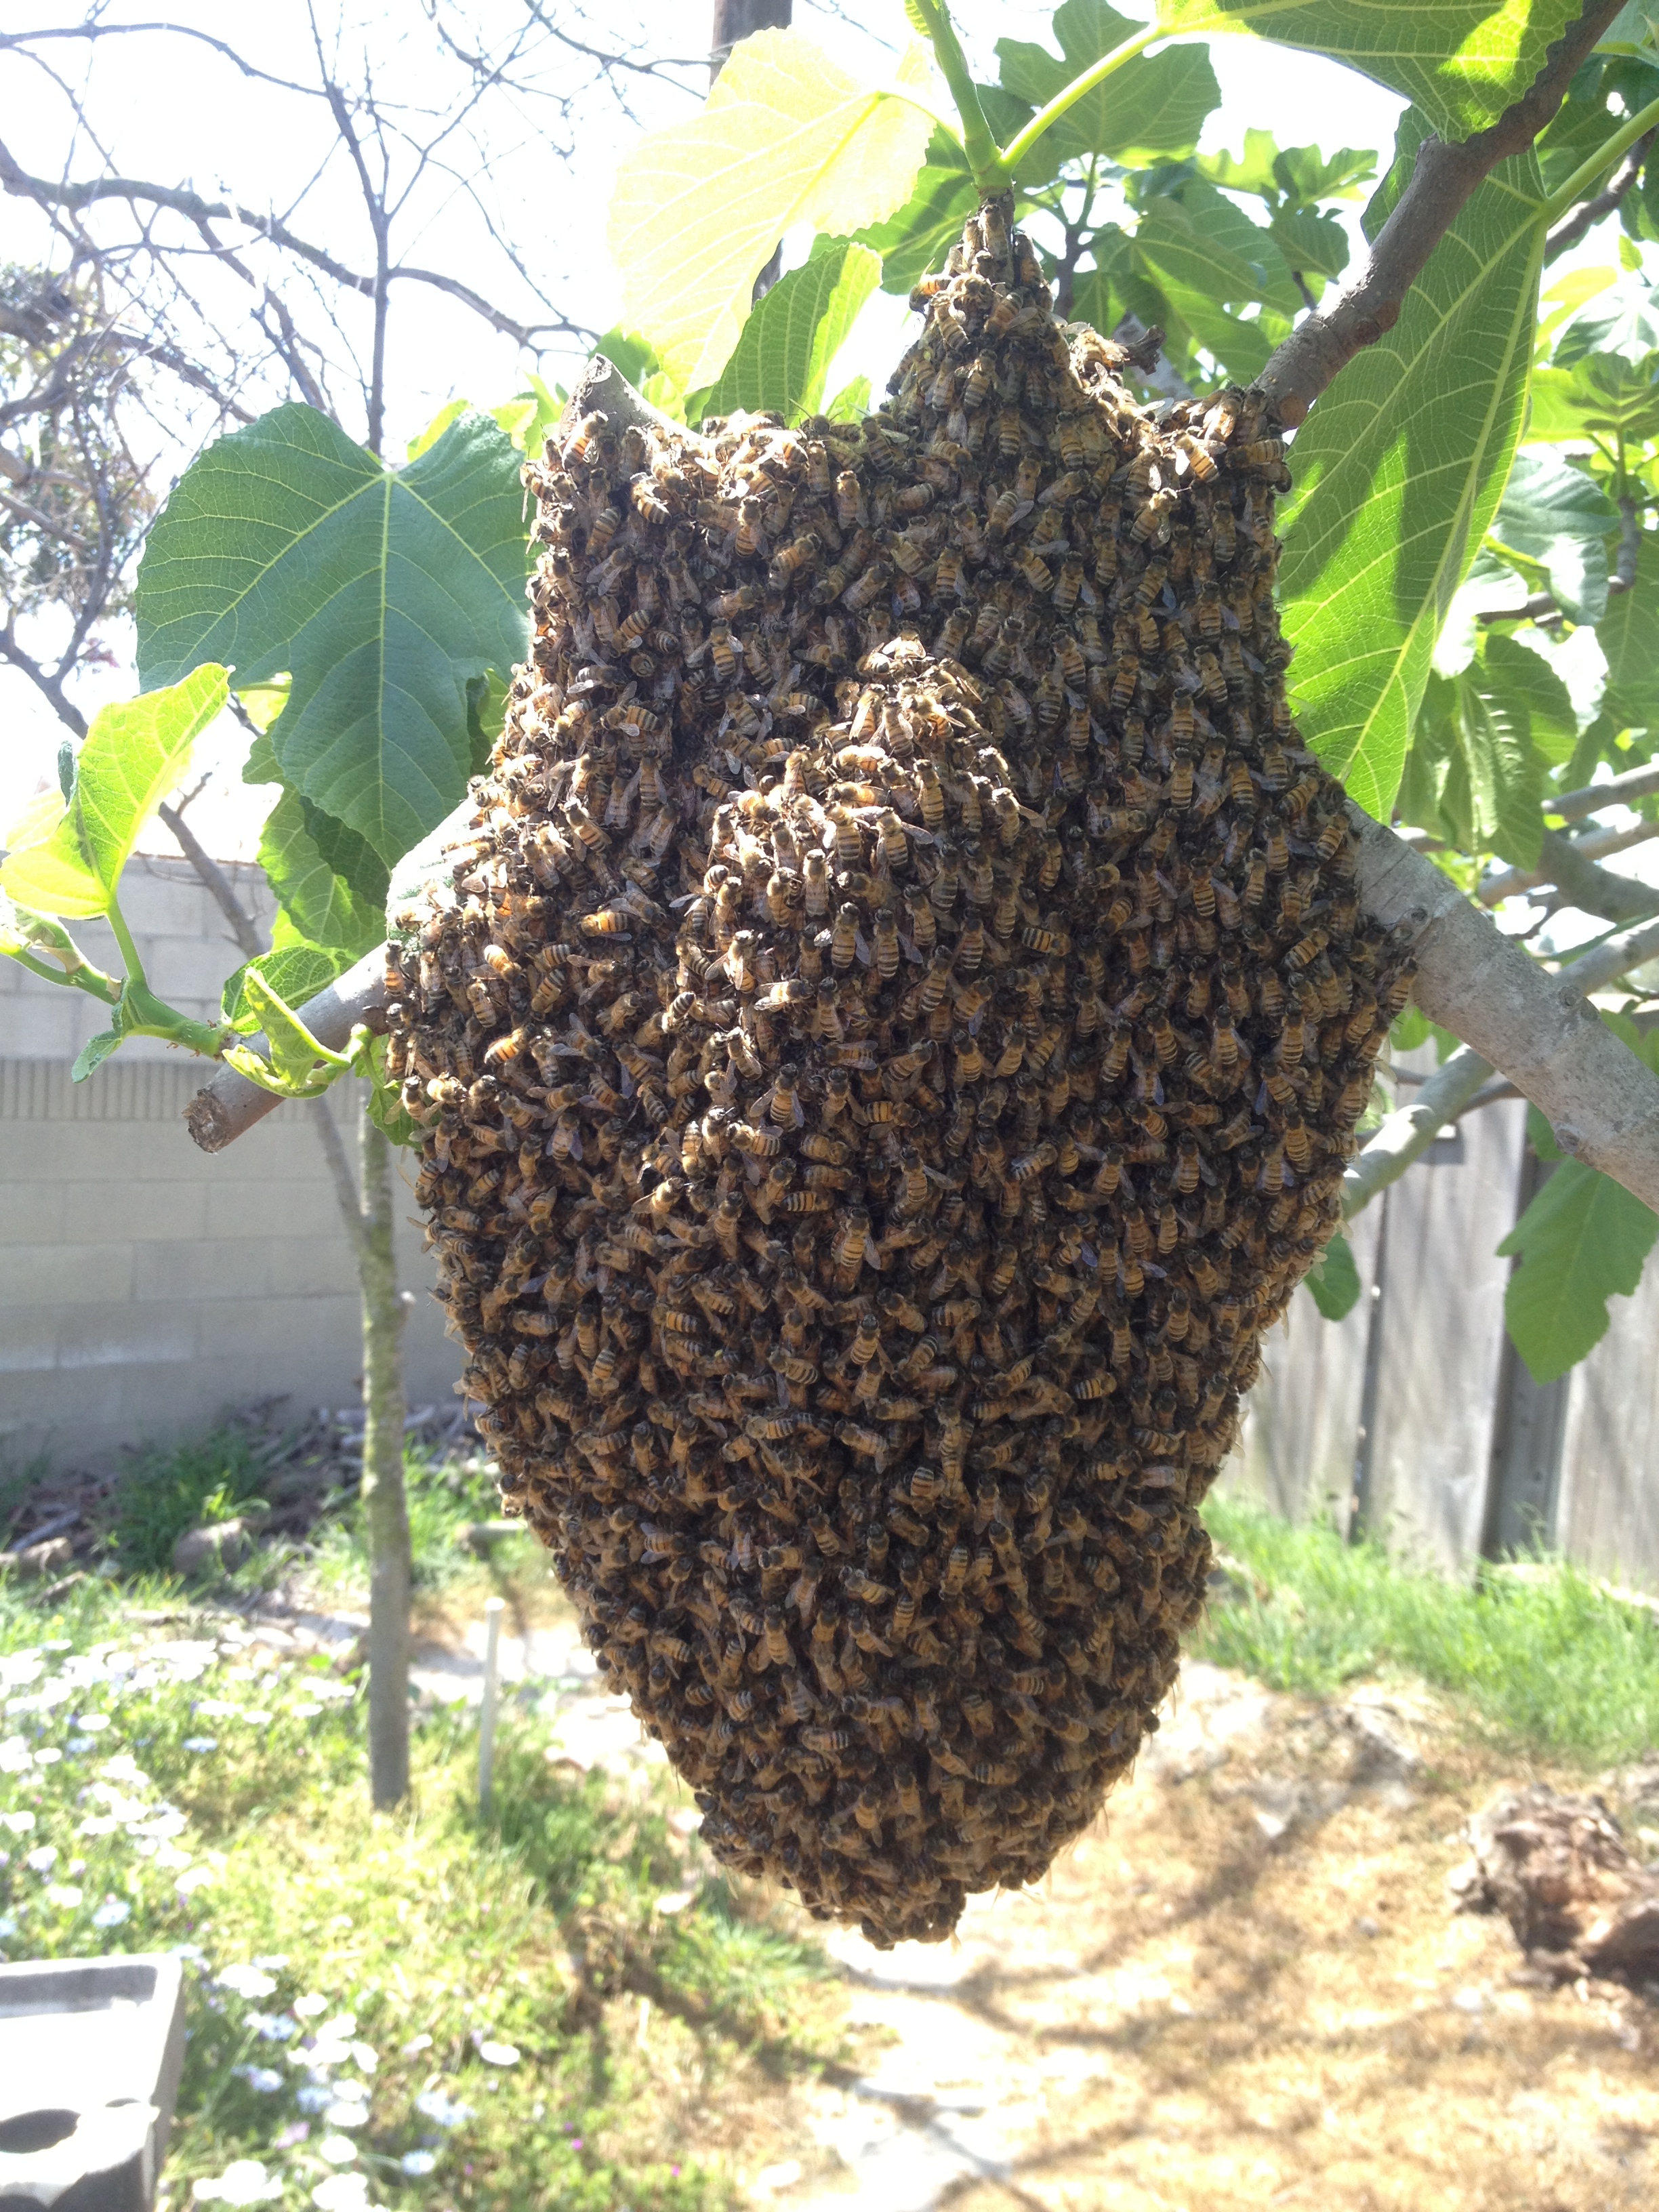 The Magnificence of the Honey Bee Colony